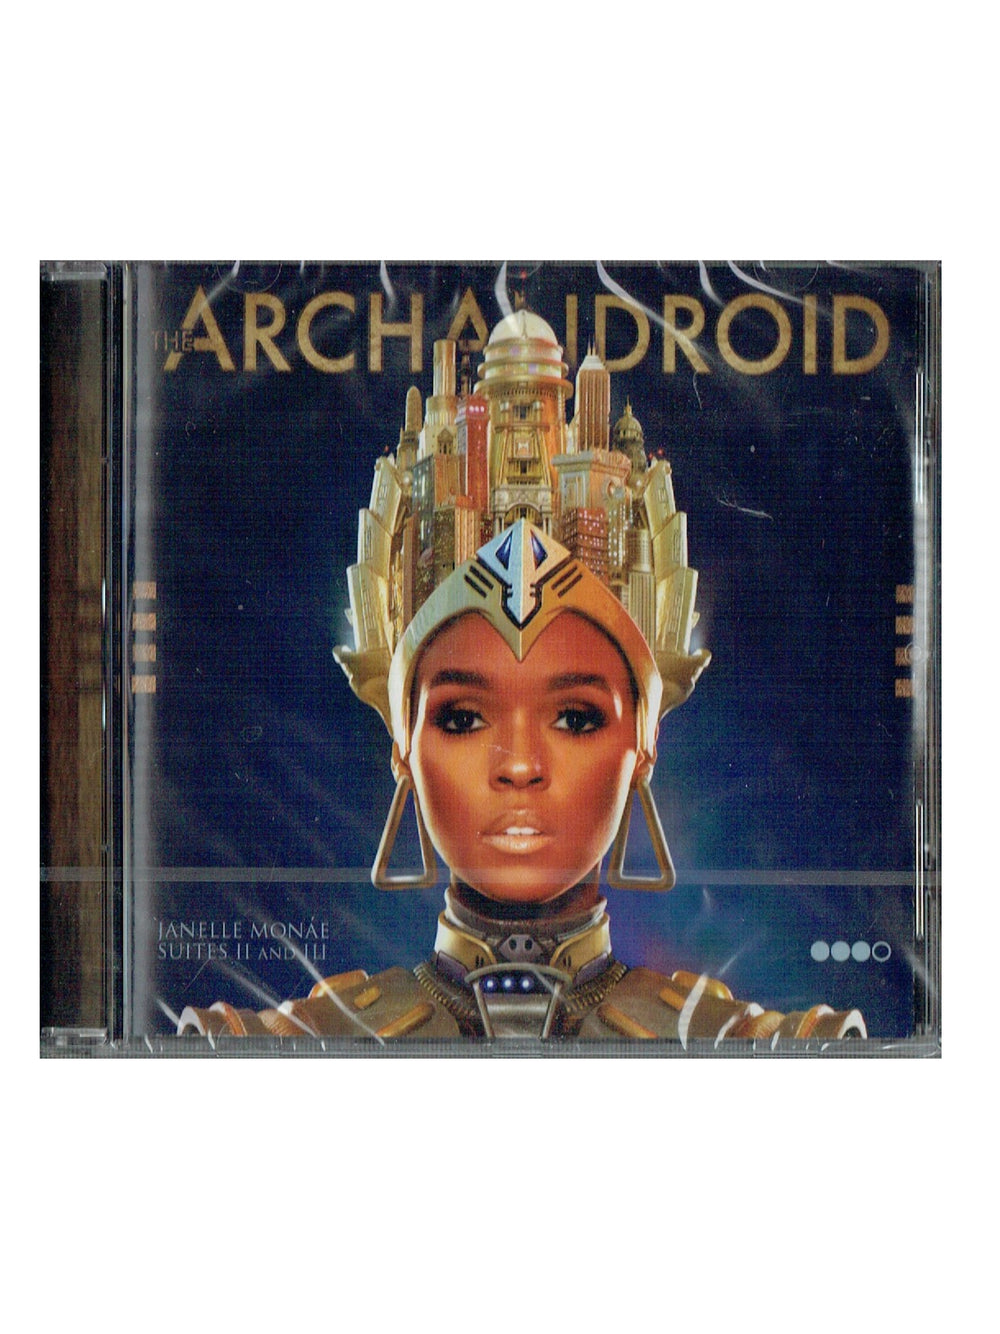 Prince – Janelle Monae The Arch Android CD Album EU NEW: 2010